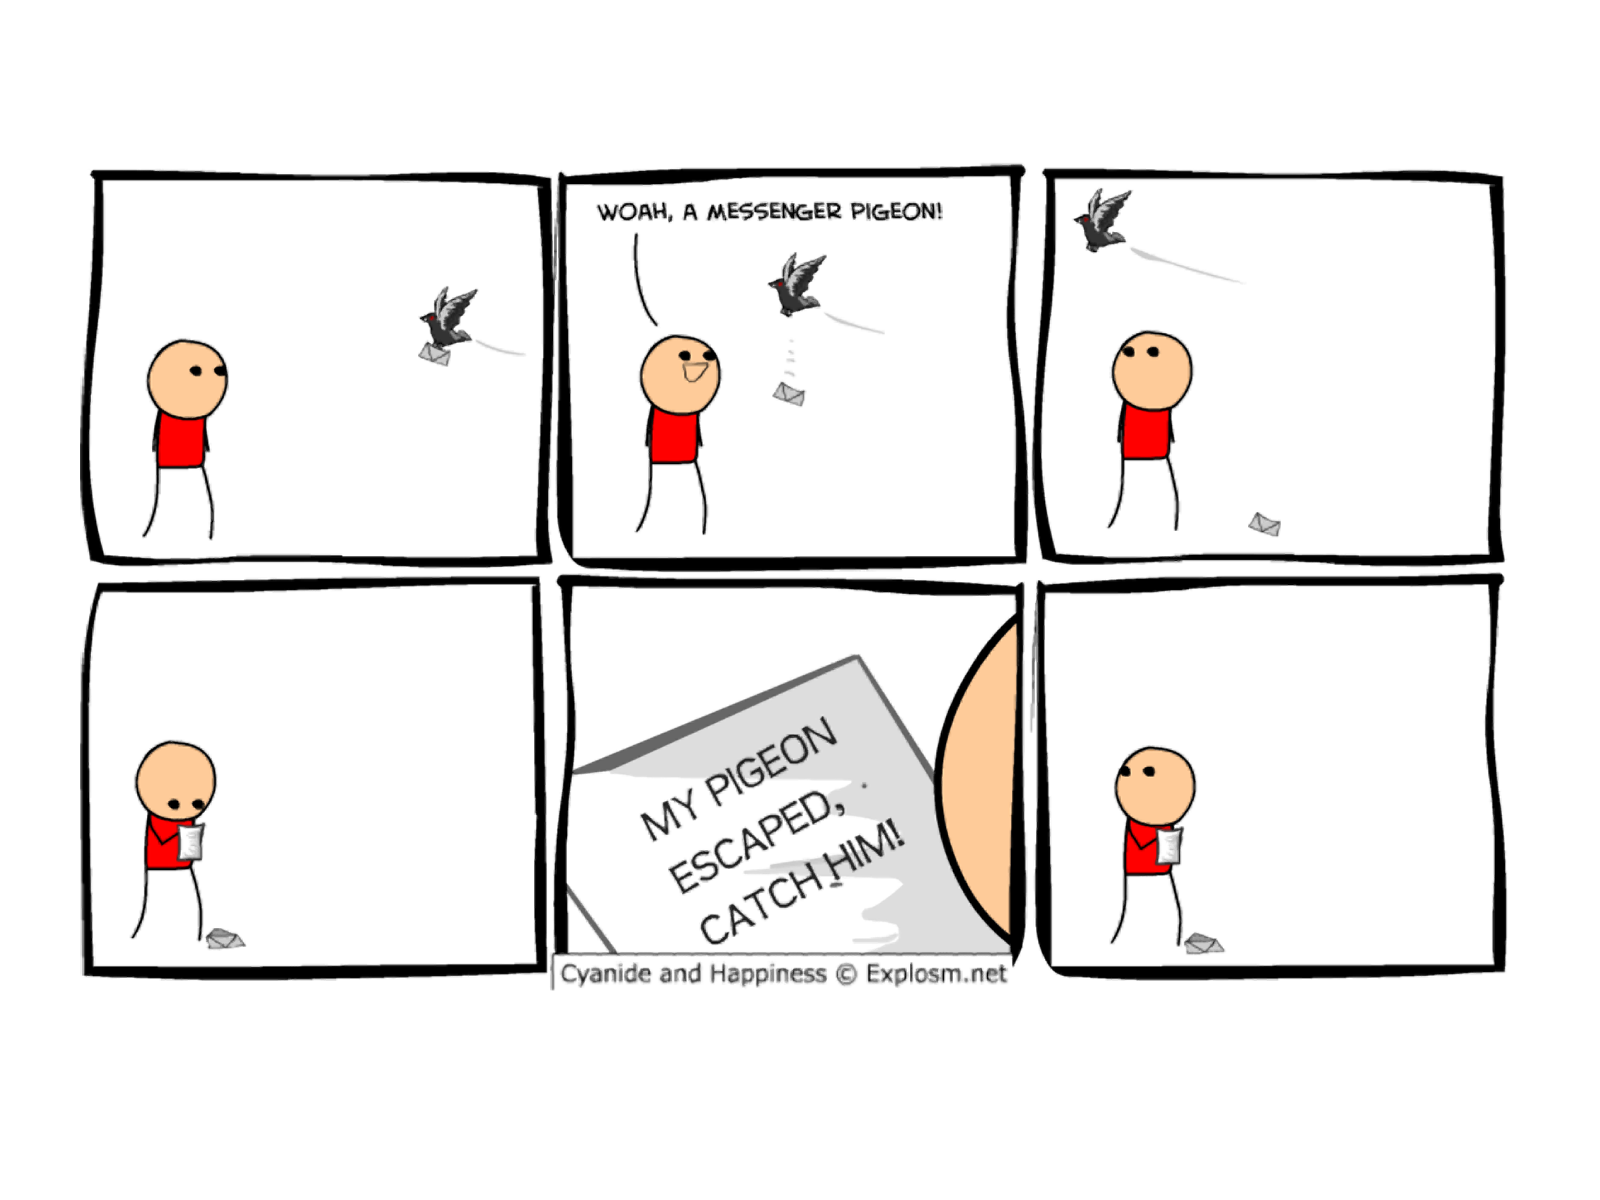 Some Ics By Cyanide And Happiness